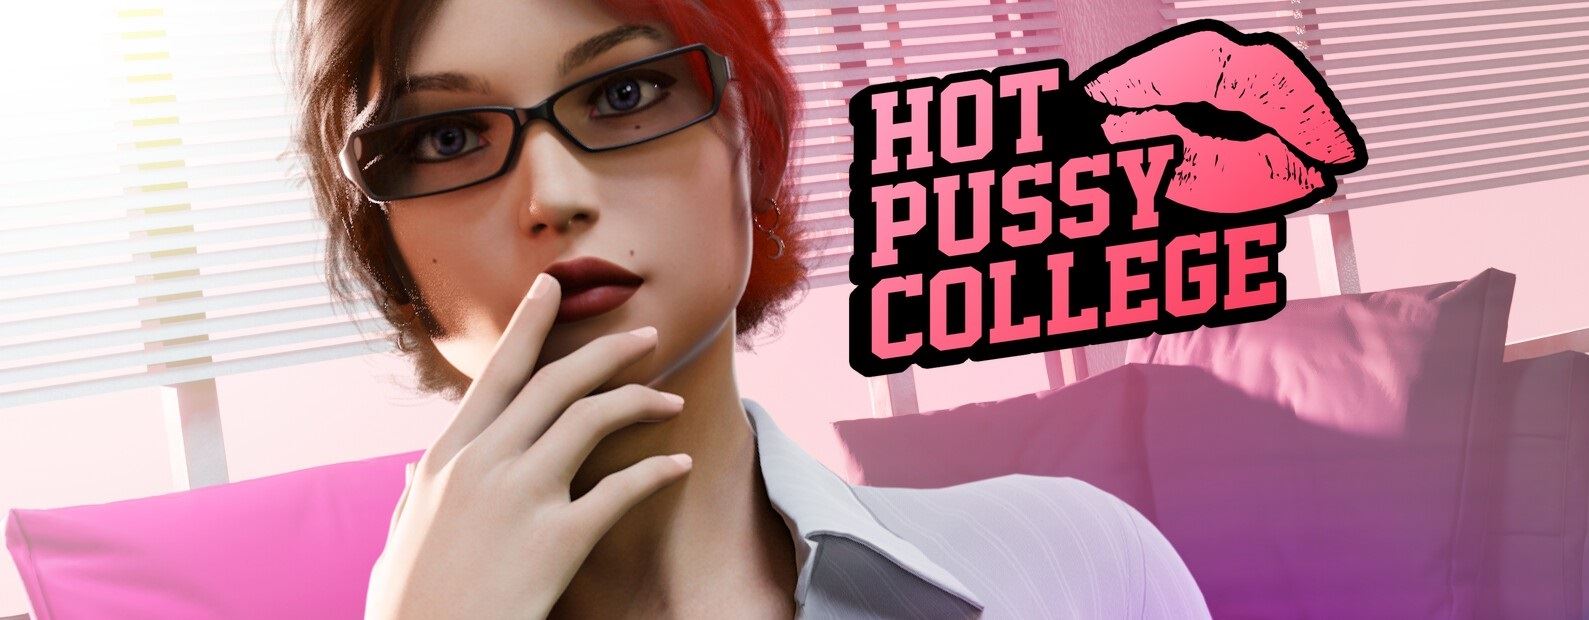 Hot Puse - Hot Pussy College Unity Porn Sex Game v.2022-10-15 Download for Windows